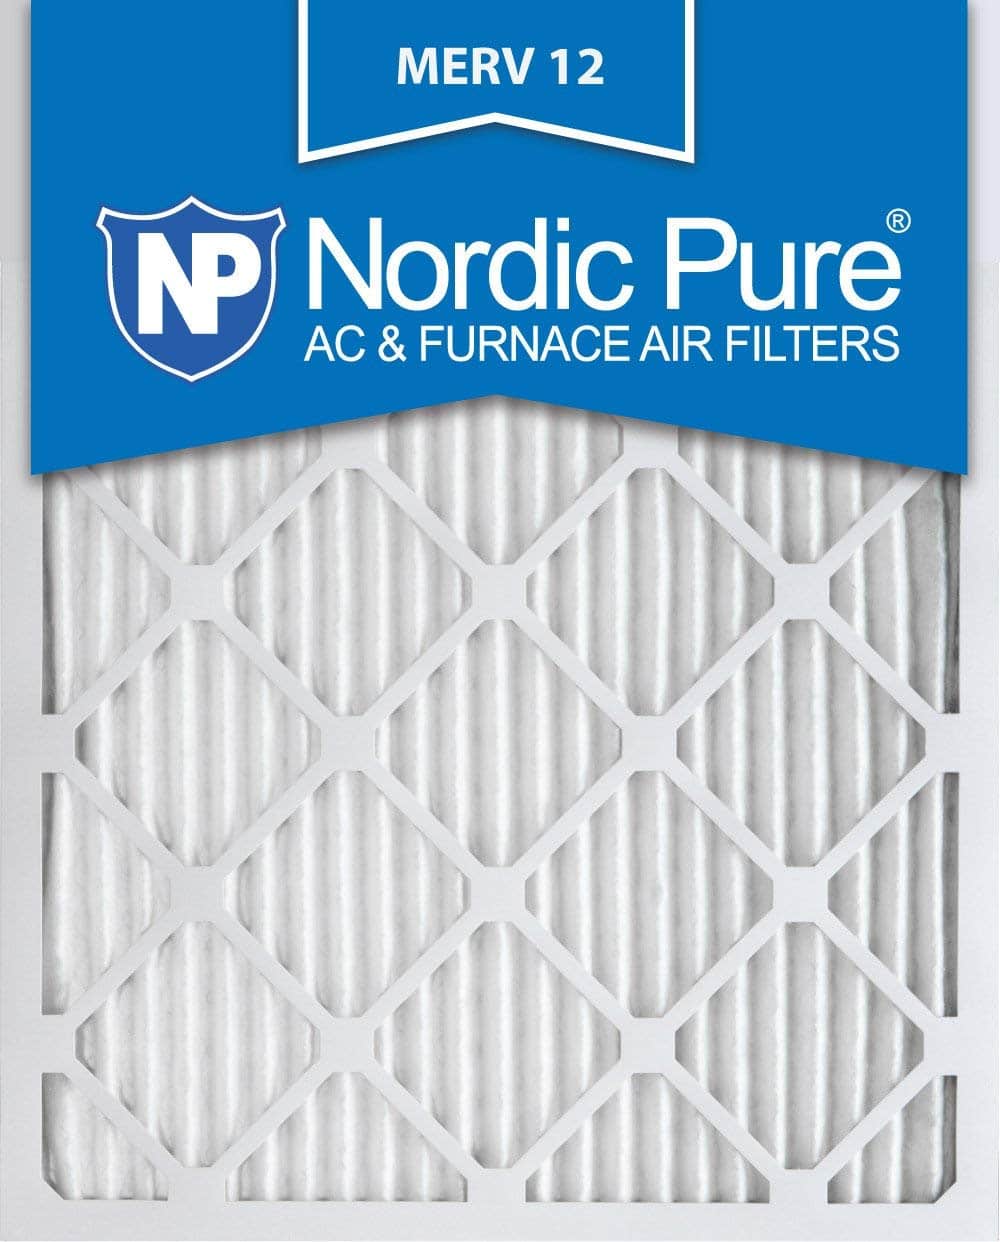 Nordic Pure 16x25x1 MERV 12 Pleated AC Furnace Air Filter in white background